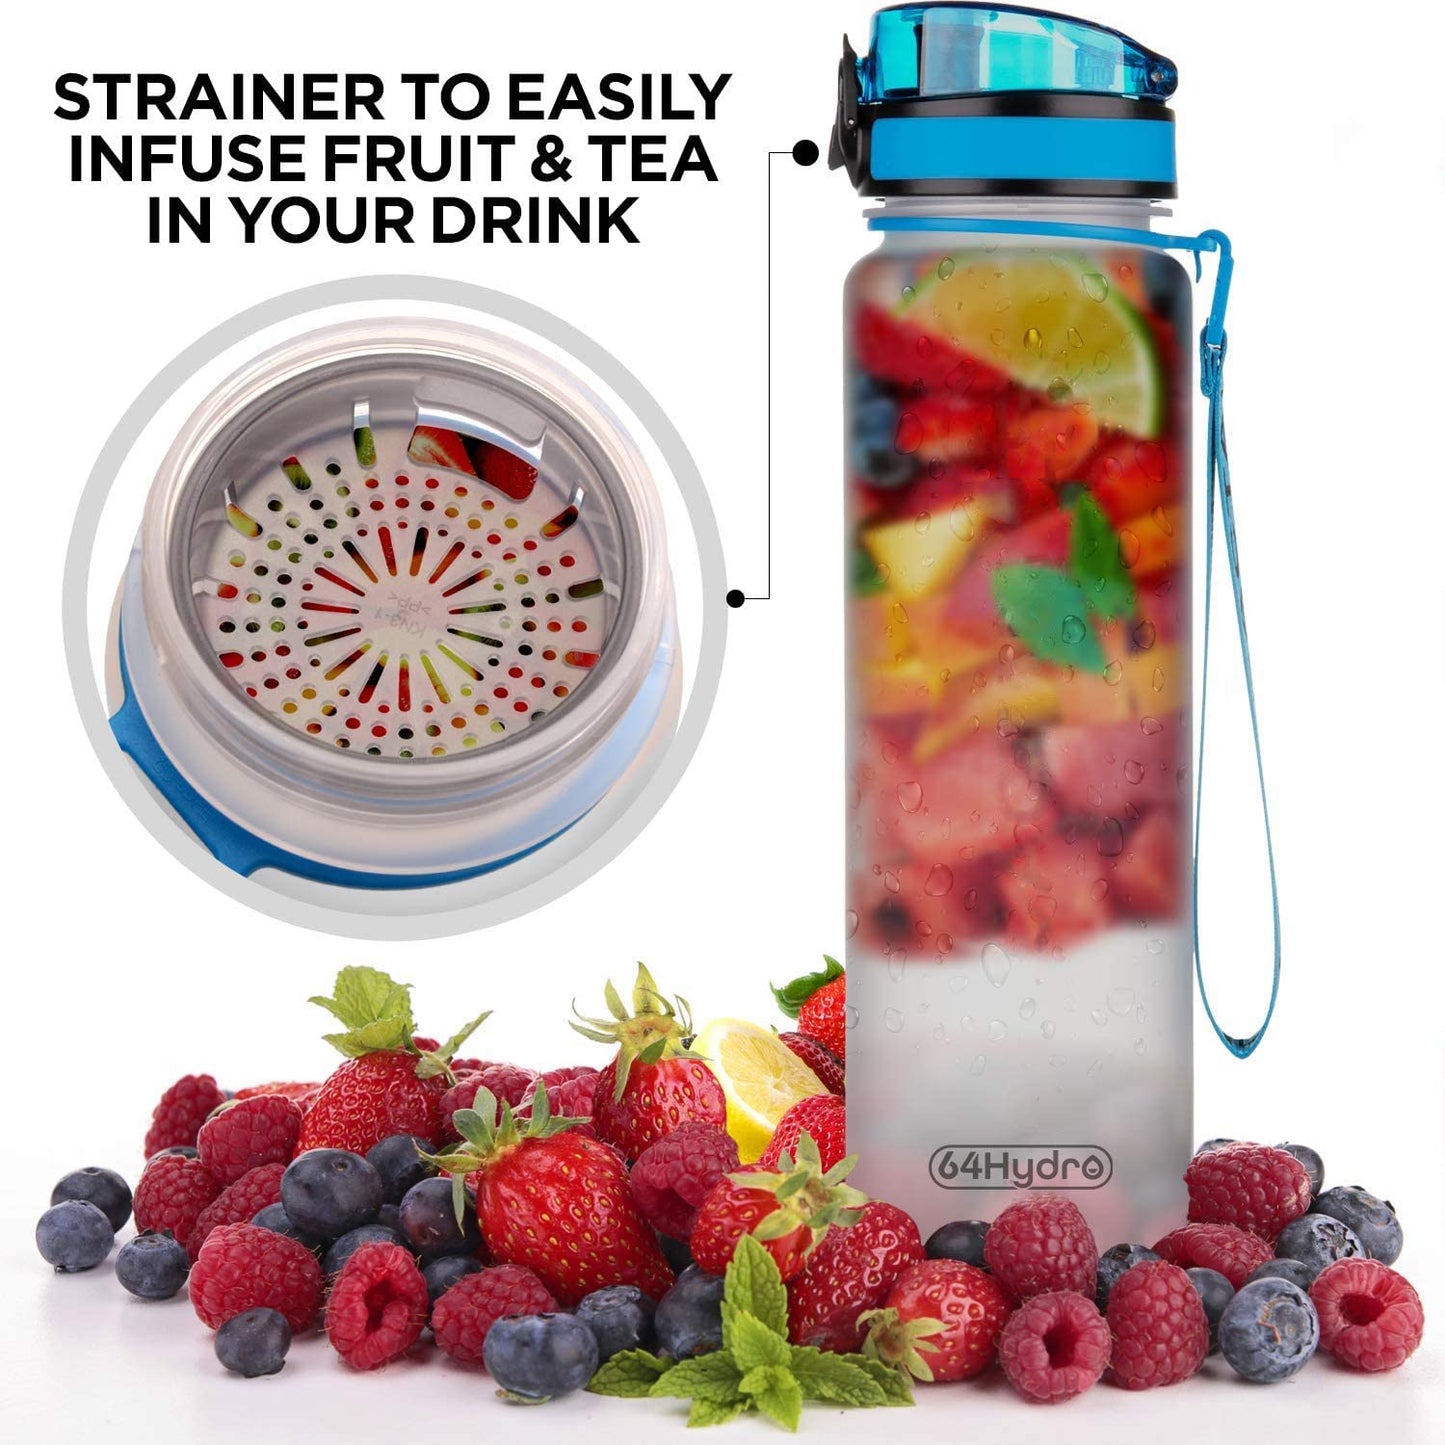 64HYDRO 32oz 1Liter Motivational Water Bottle with Time Marker & Removable Strainer, Fast Flow, Flip Top Leakproof Durable BPA Free Non-Toxic for Home, Work, Fitness, Gym and Outdoor Sports